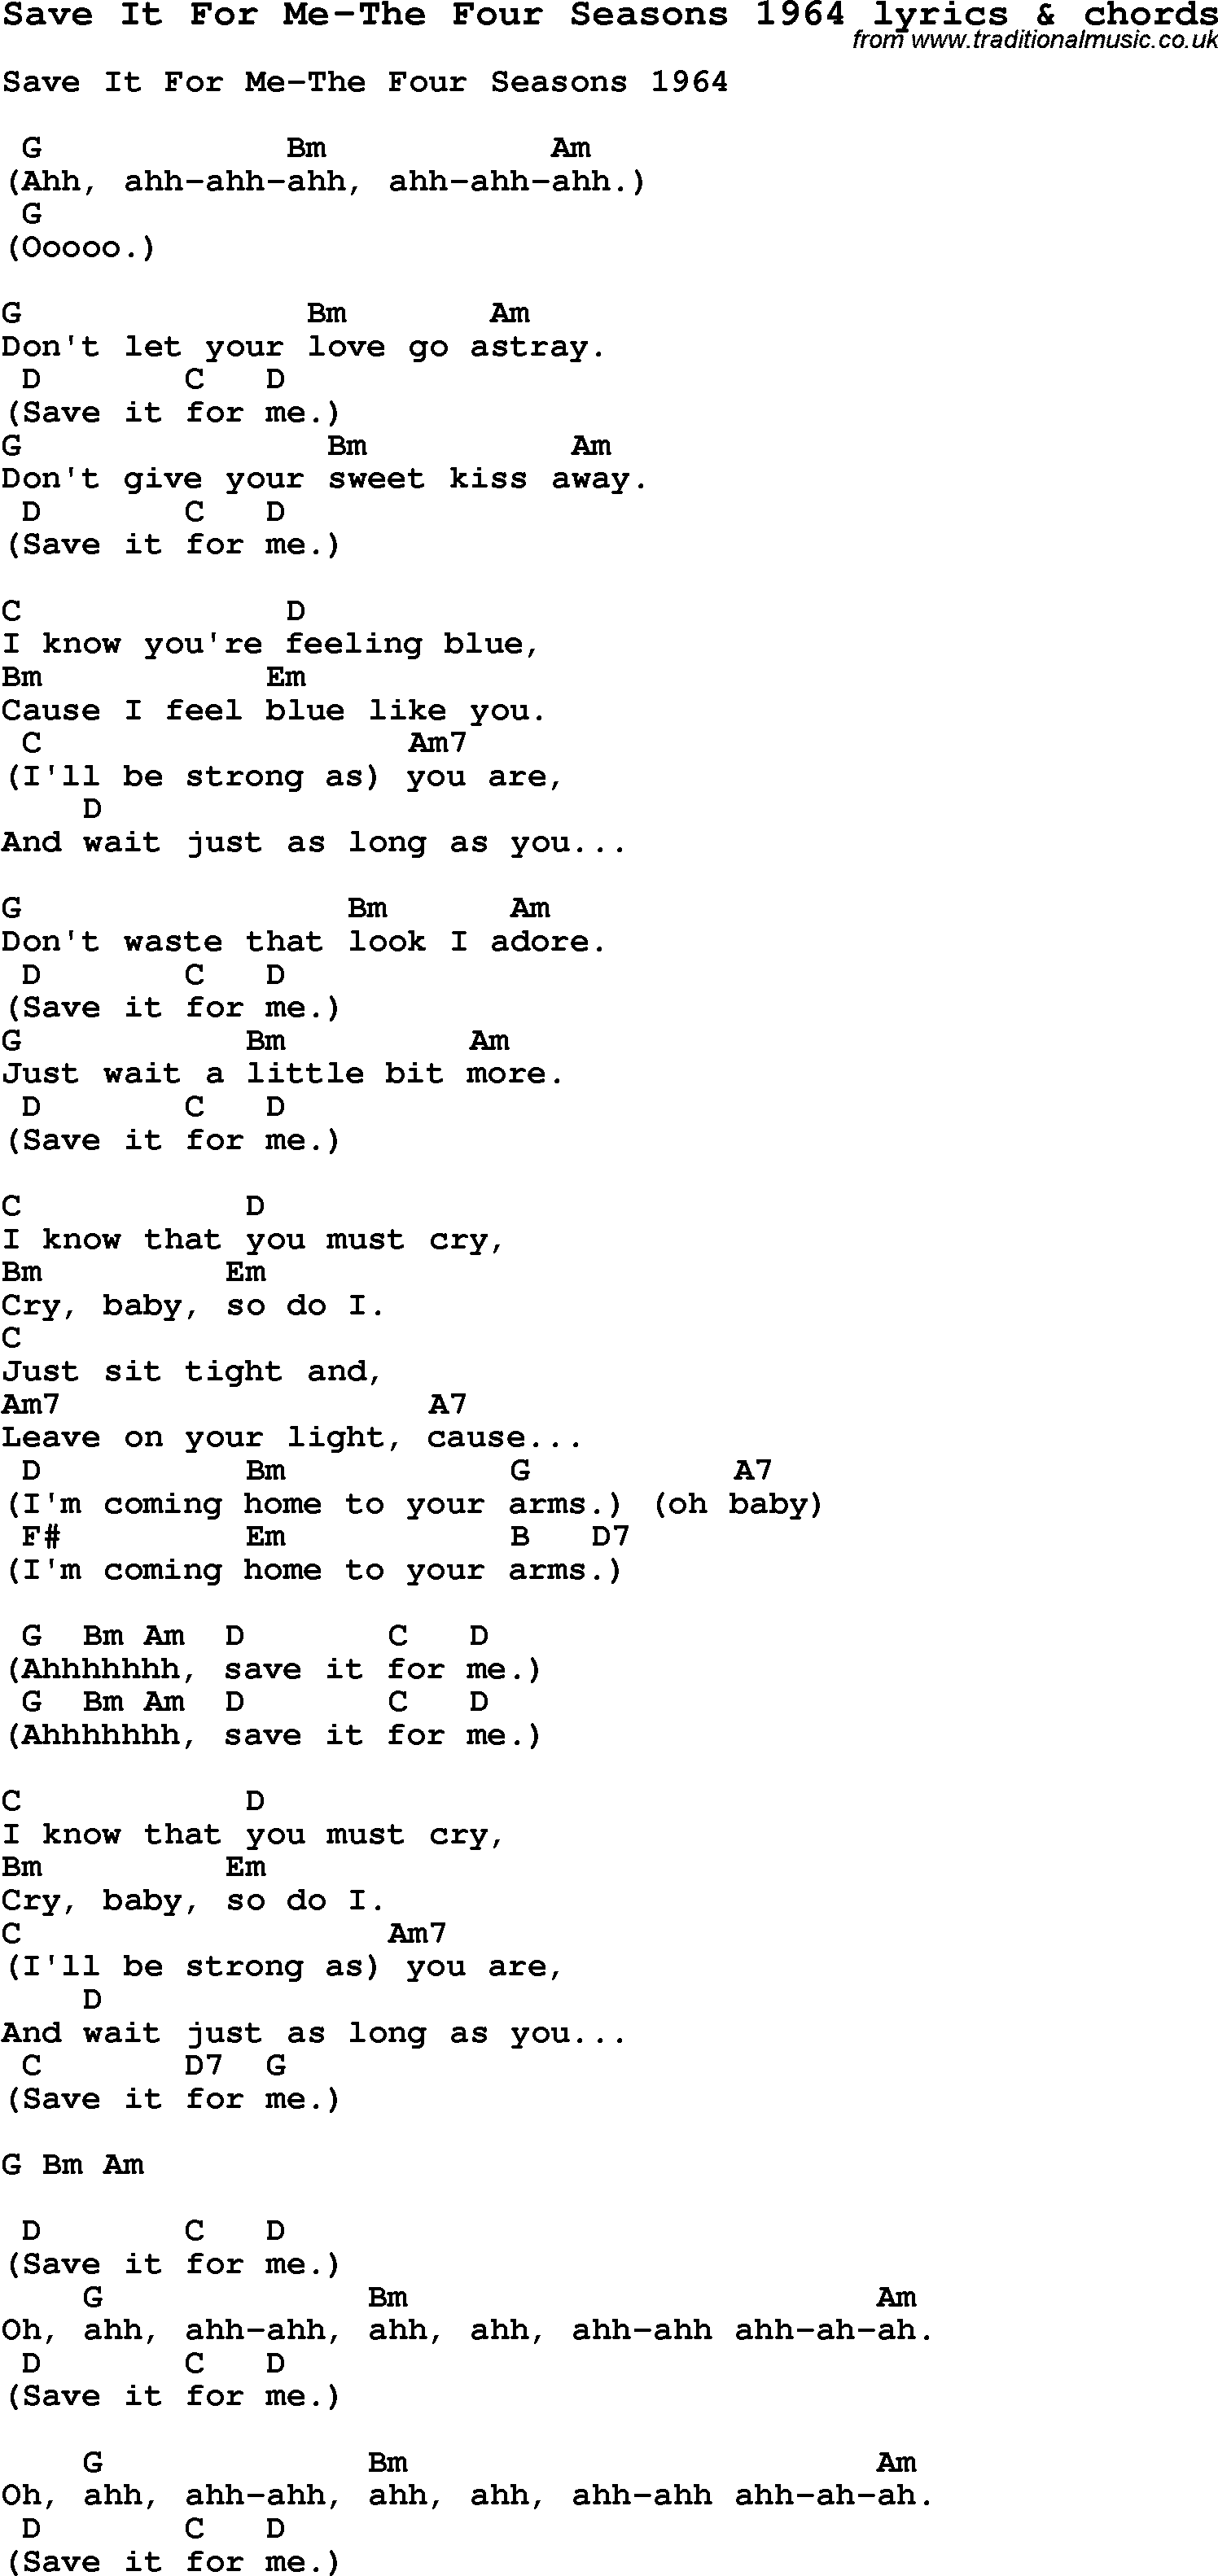 Love Song Lyrics for: Save It For Me-The Four Seasons 1964 with chords for Ukulele, Guitar Banjo etc.